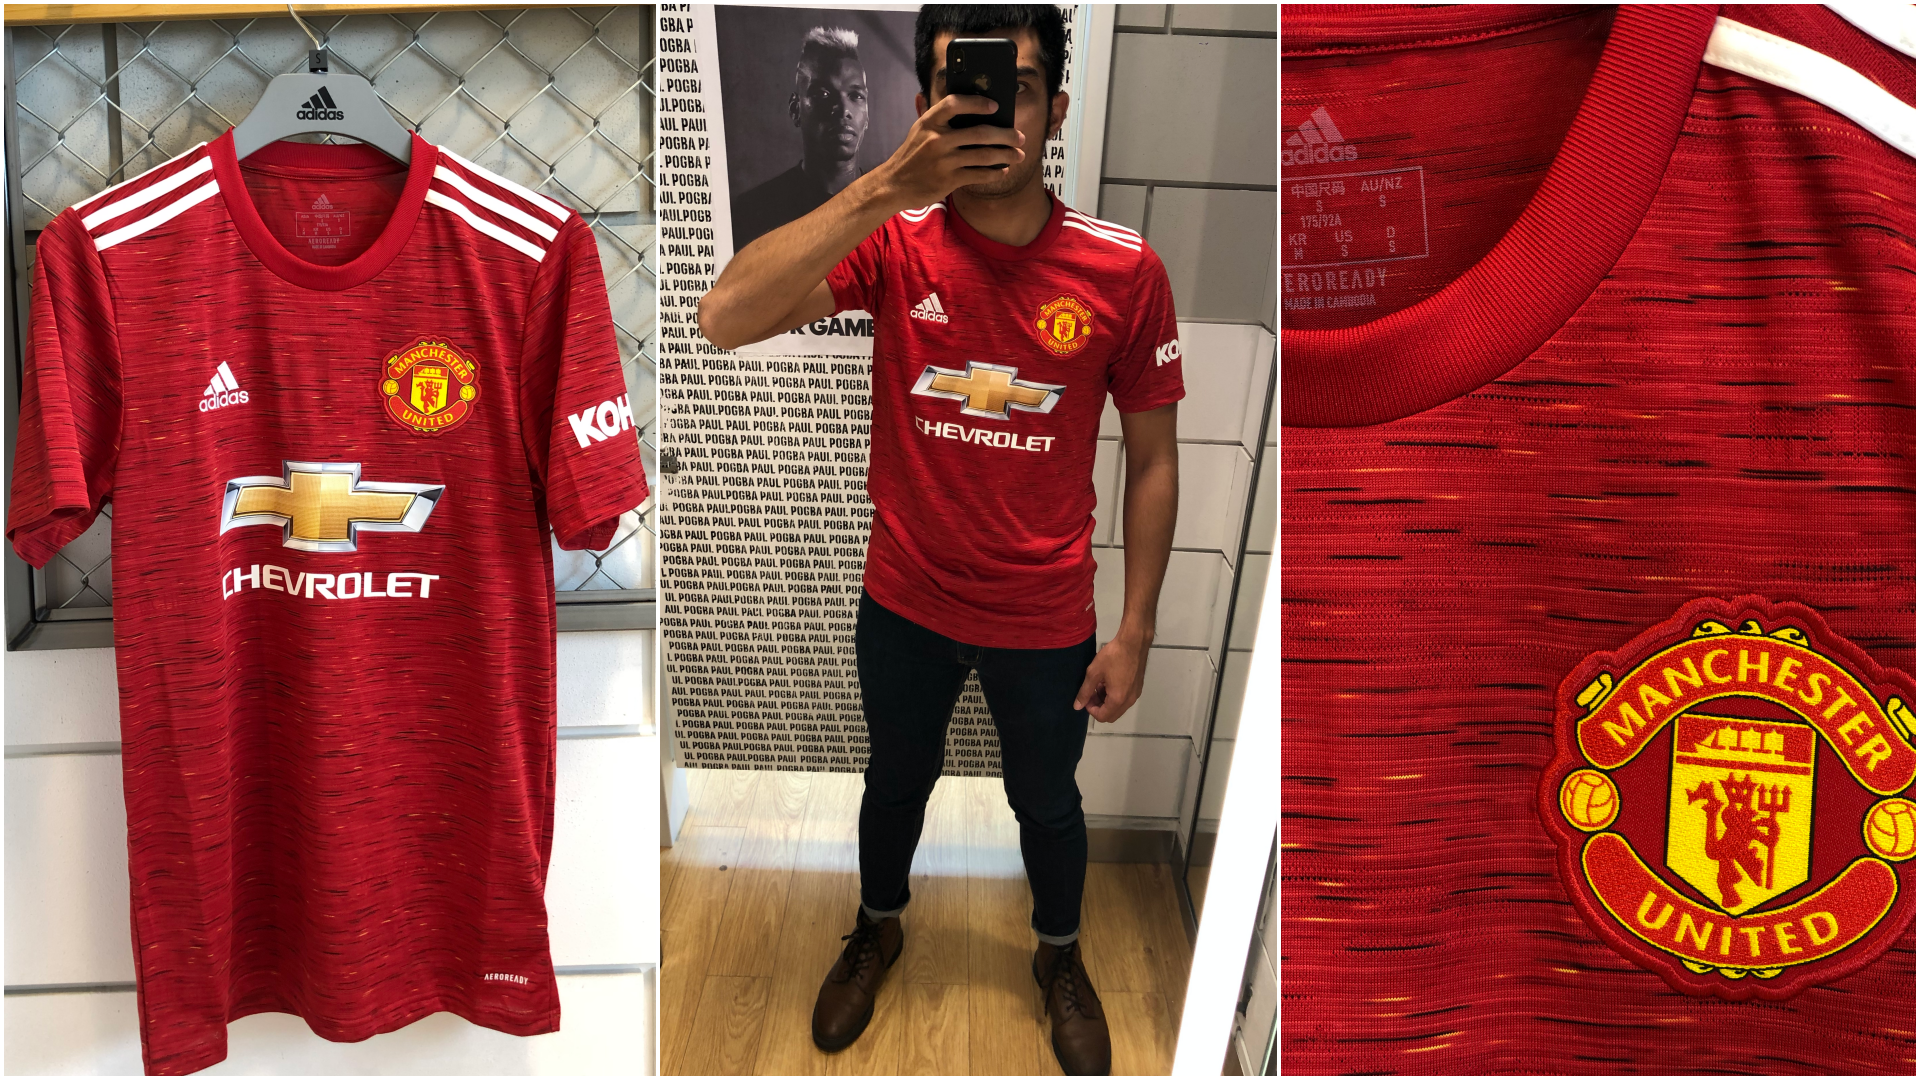 CONFIRMED? Manchester United 2020/21 Home Kit | The United ...